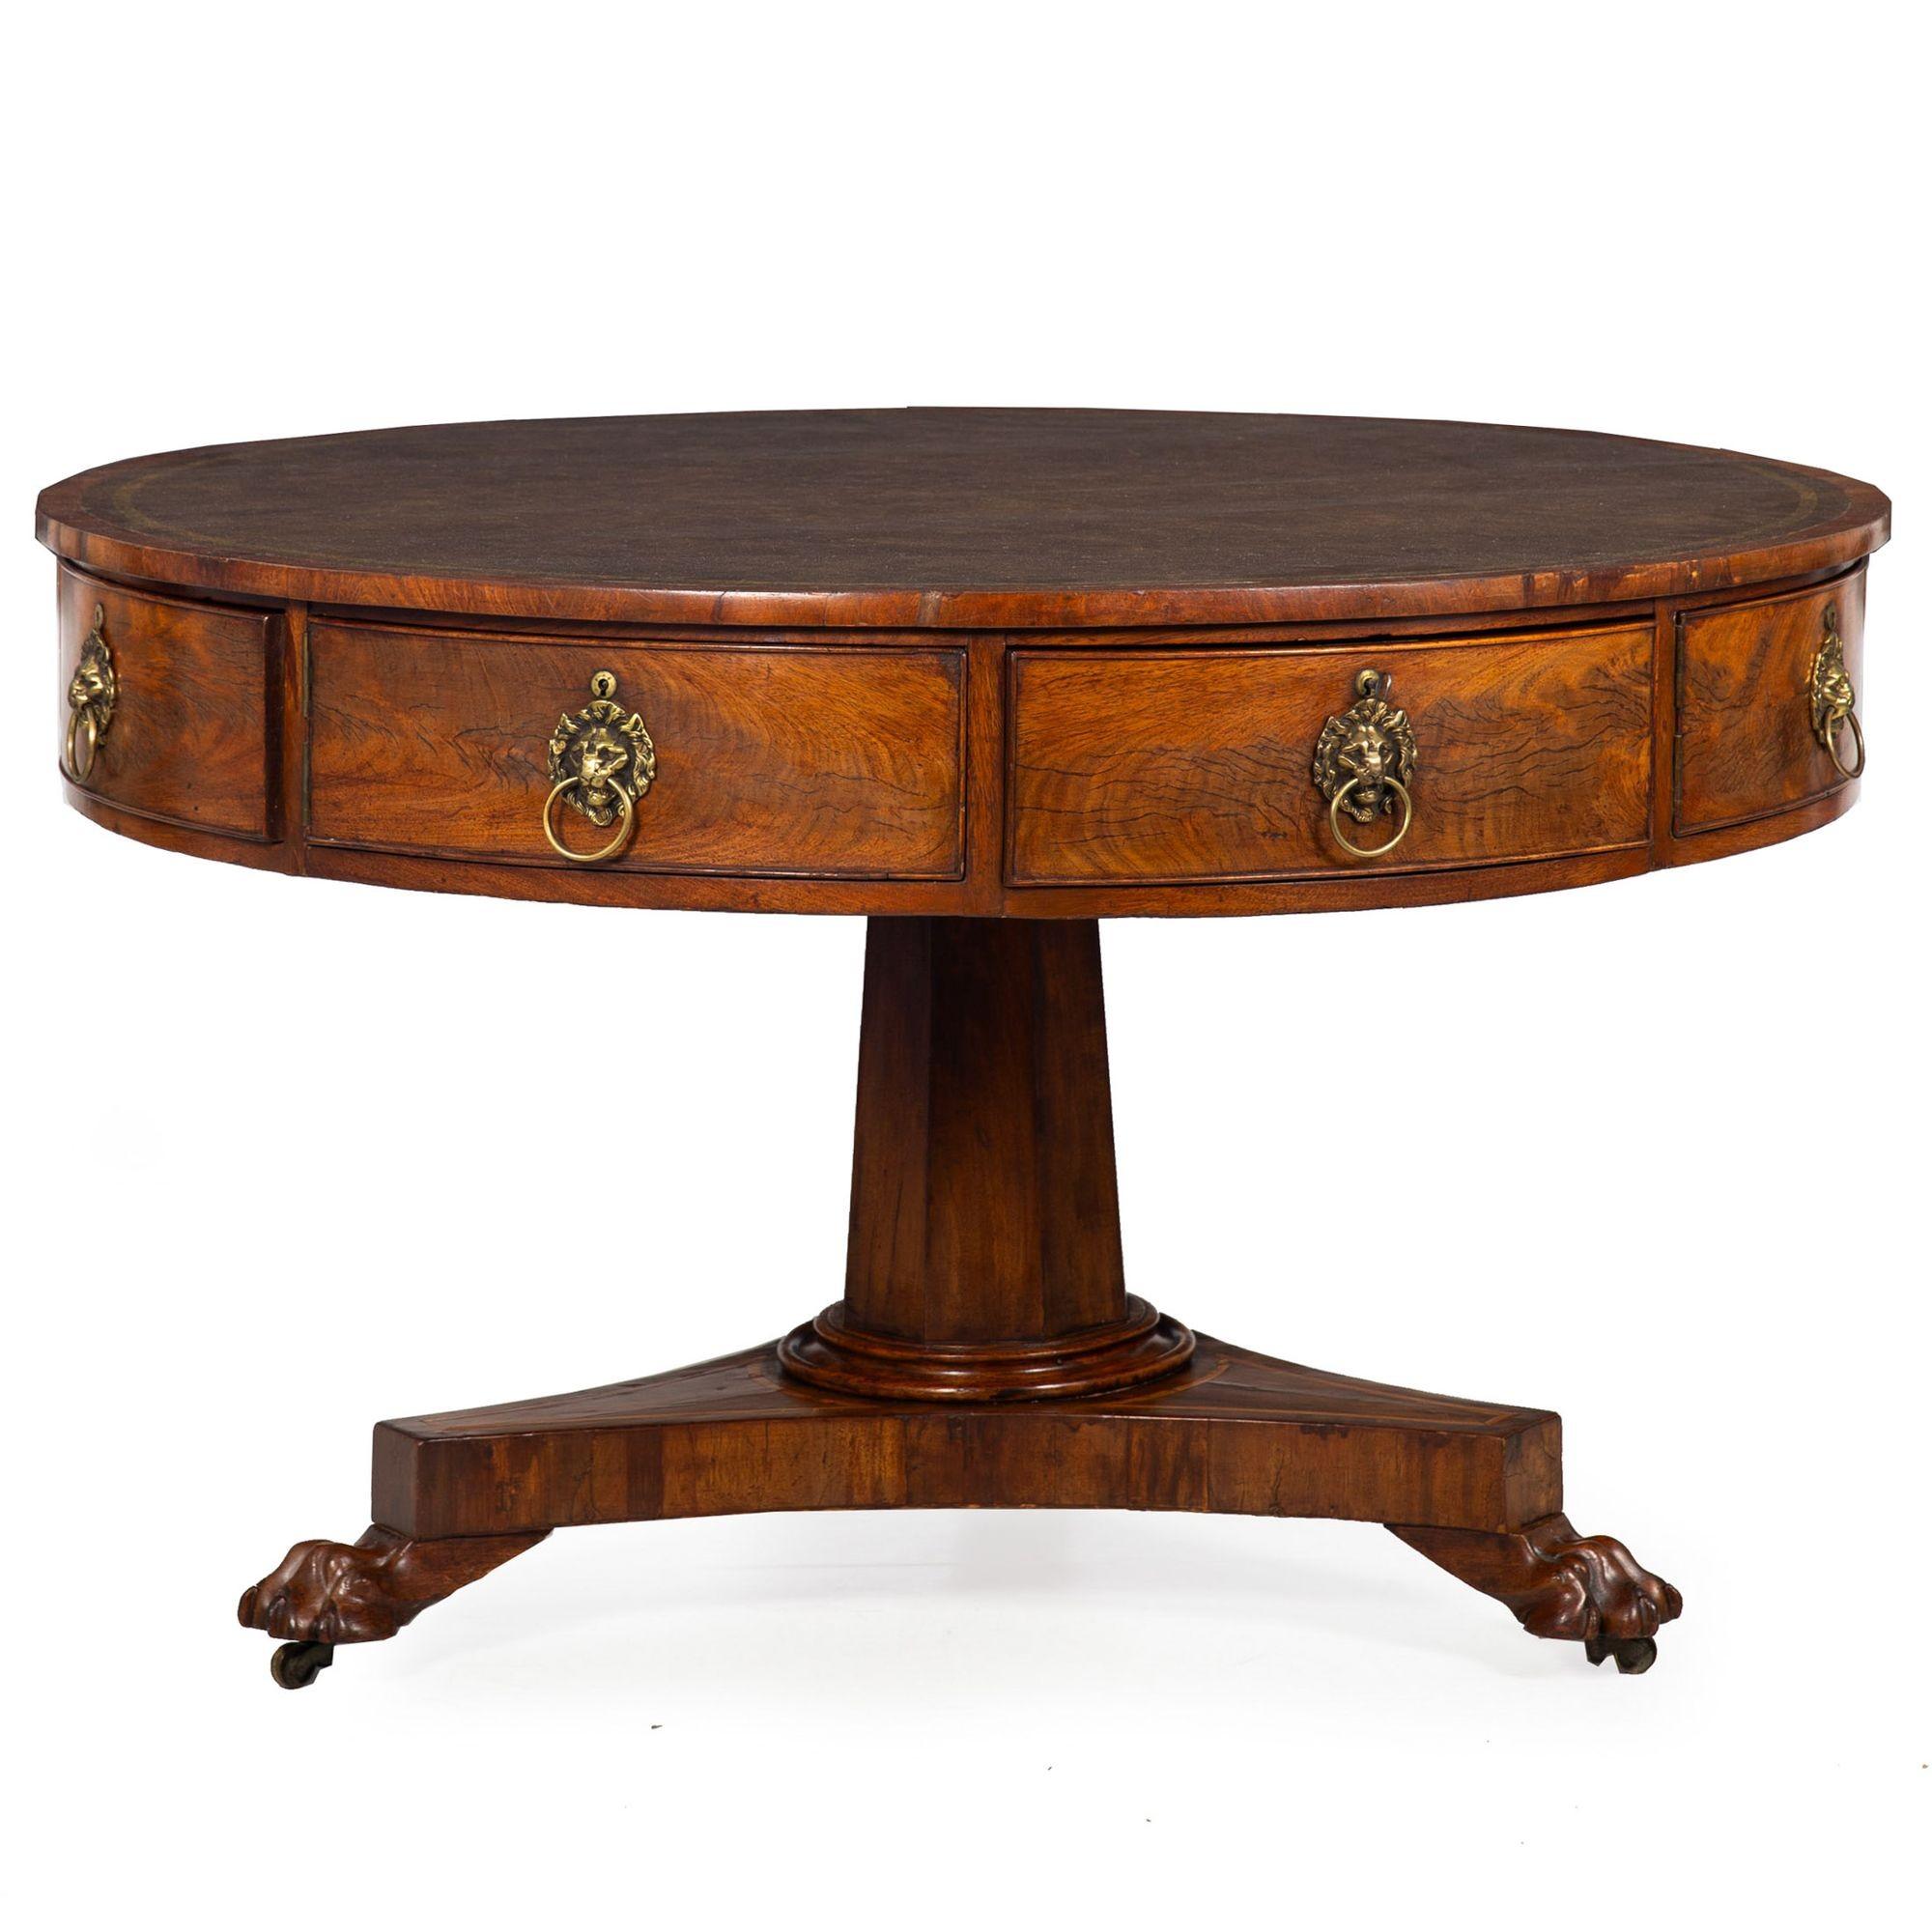 English Regency Mahogany Leather Round Rent Drum Center Table